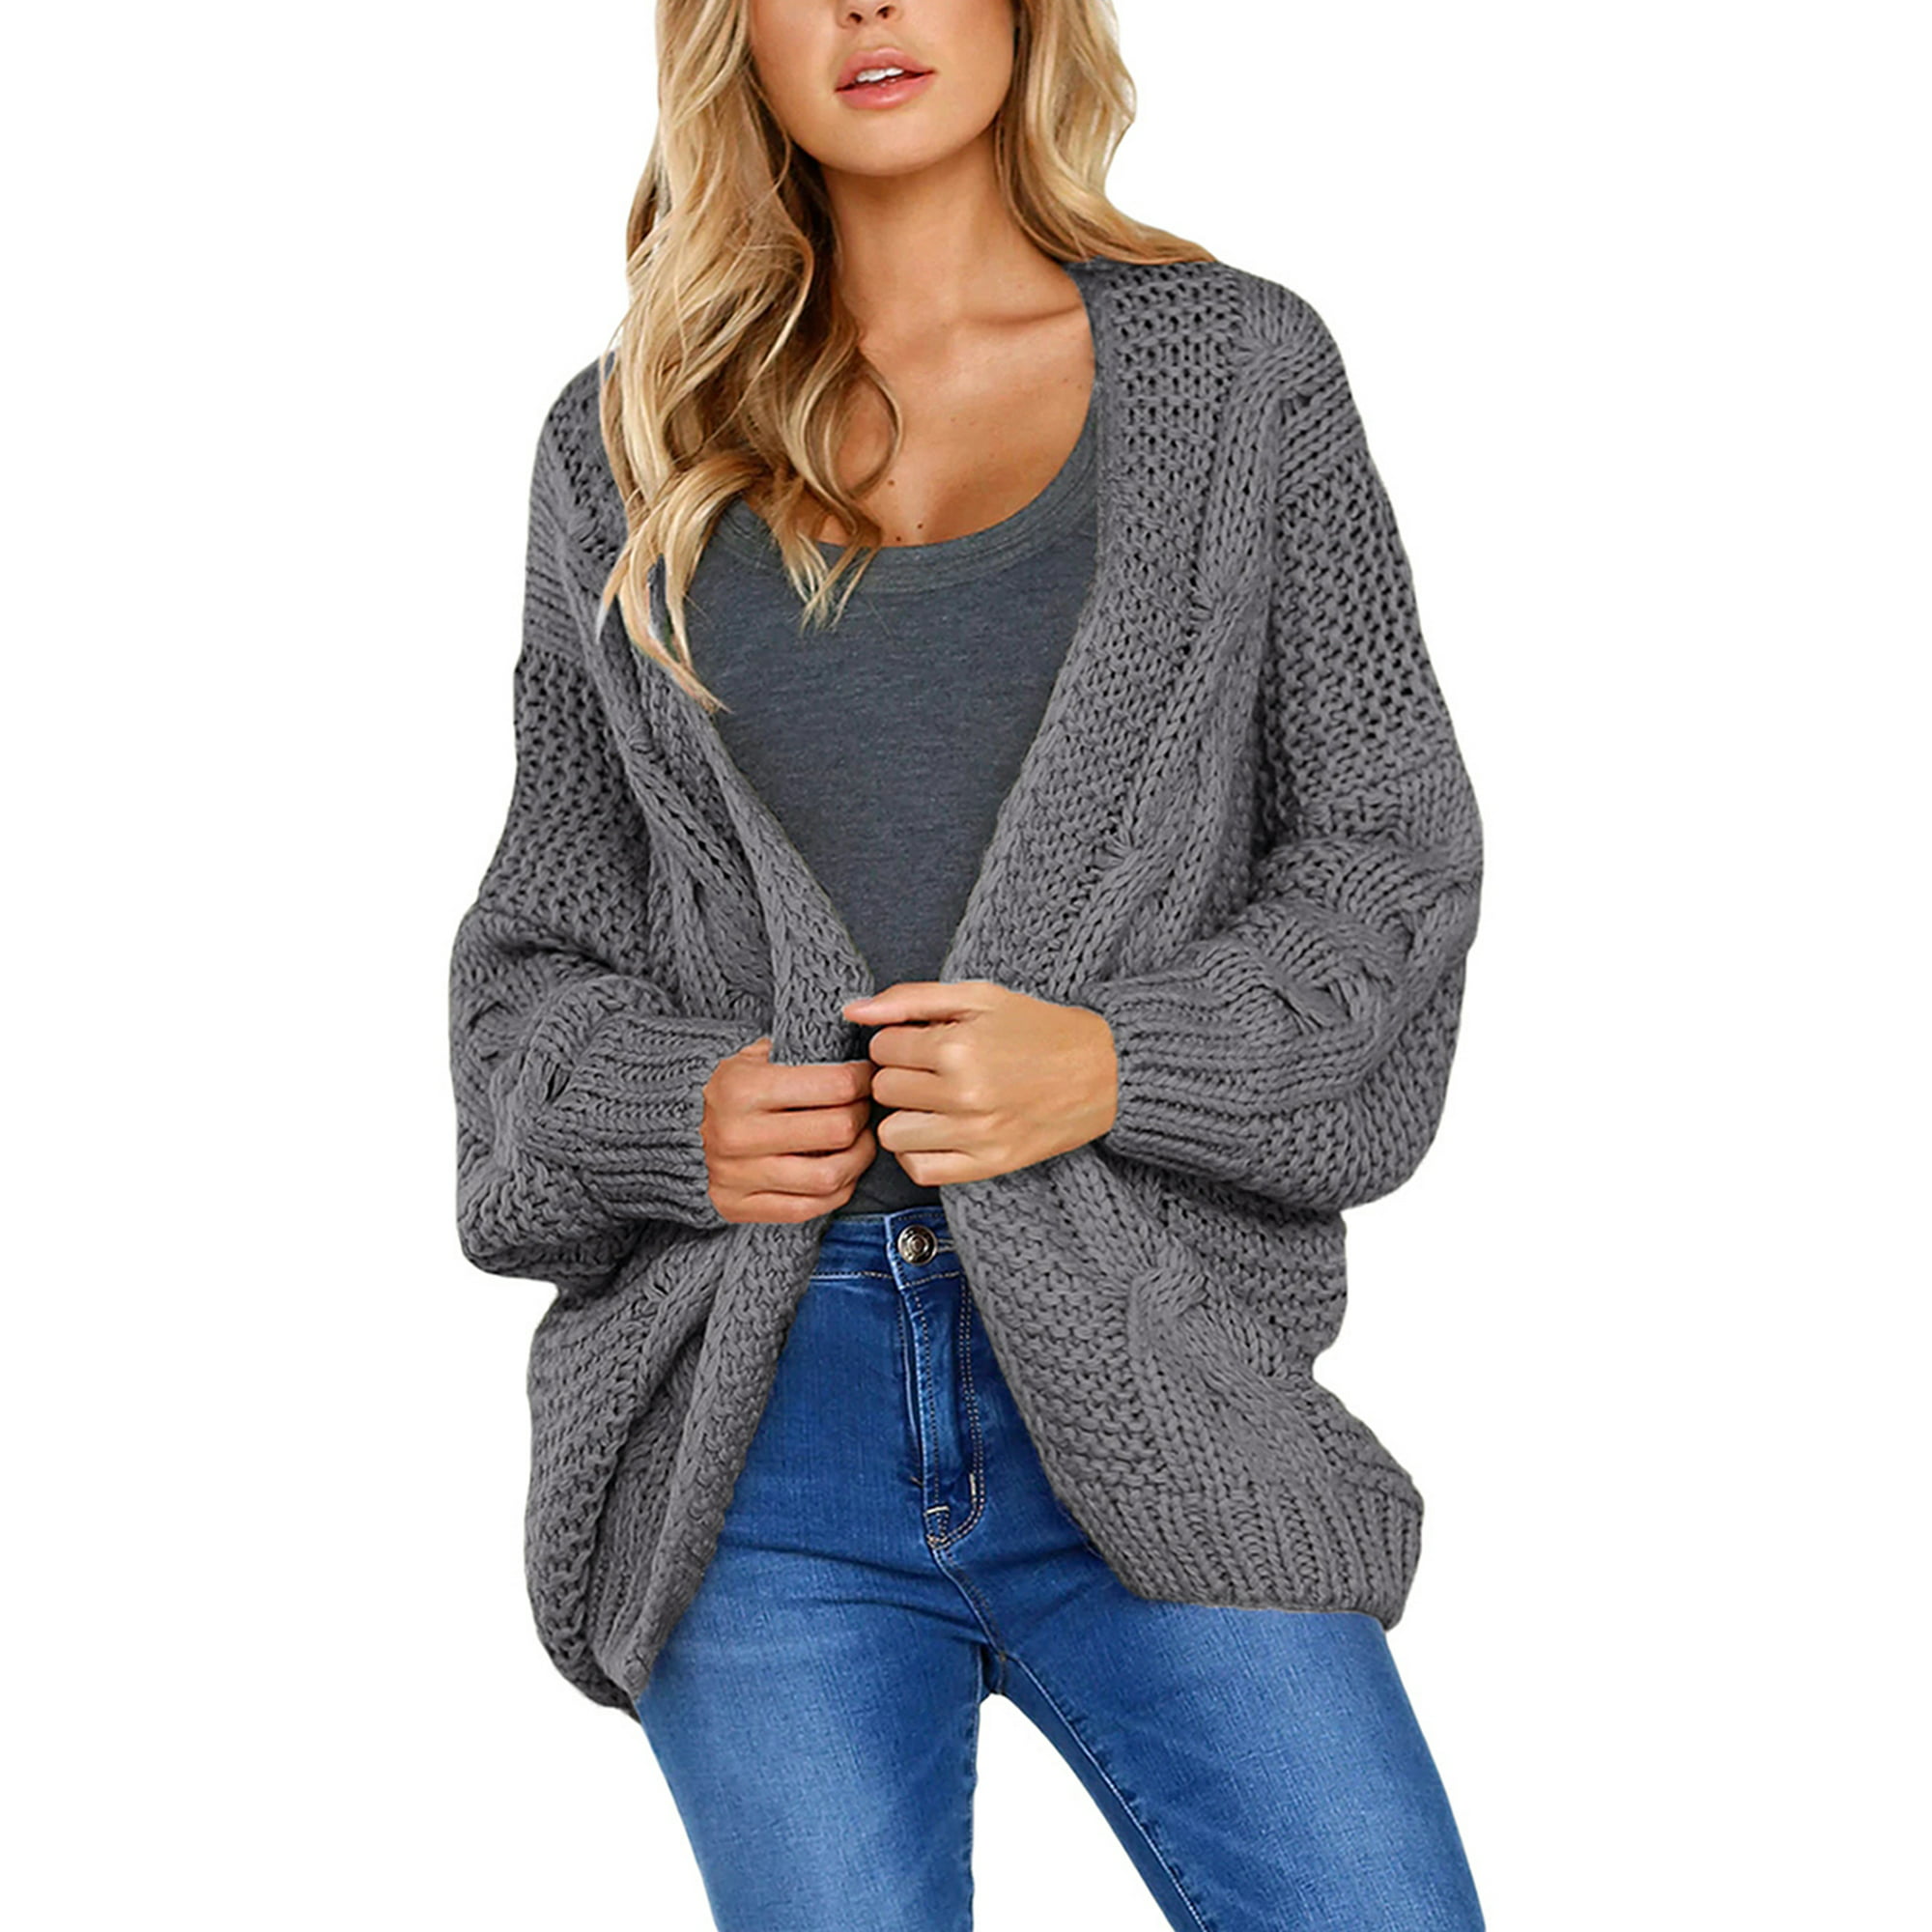 SHEWIN Womens Open Front Cardigans Sweater Plus Dark Gray Chunky Cable Sweaters for Women Long Sleeve Cardigans Coats 2XL size 18-20 - Walmart.com